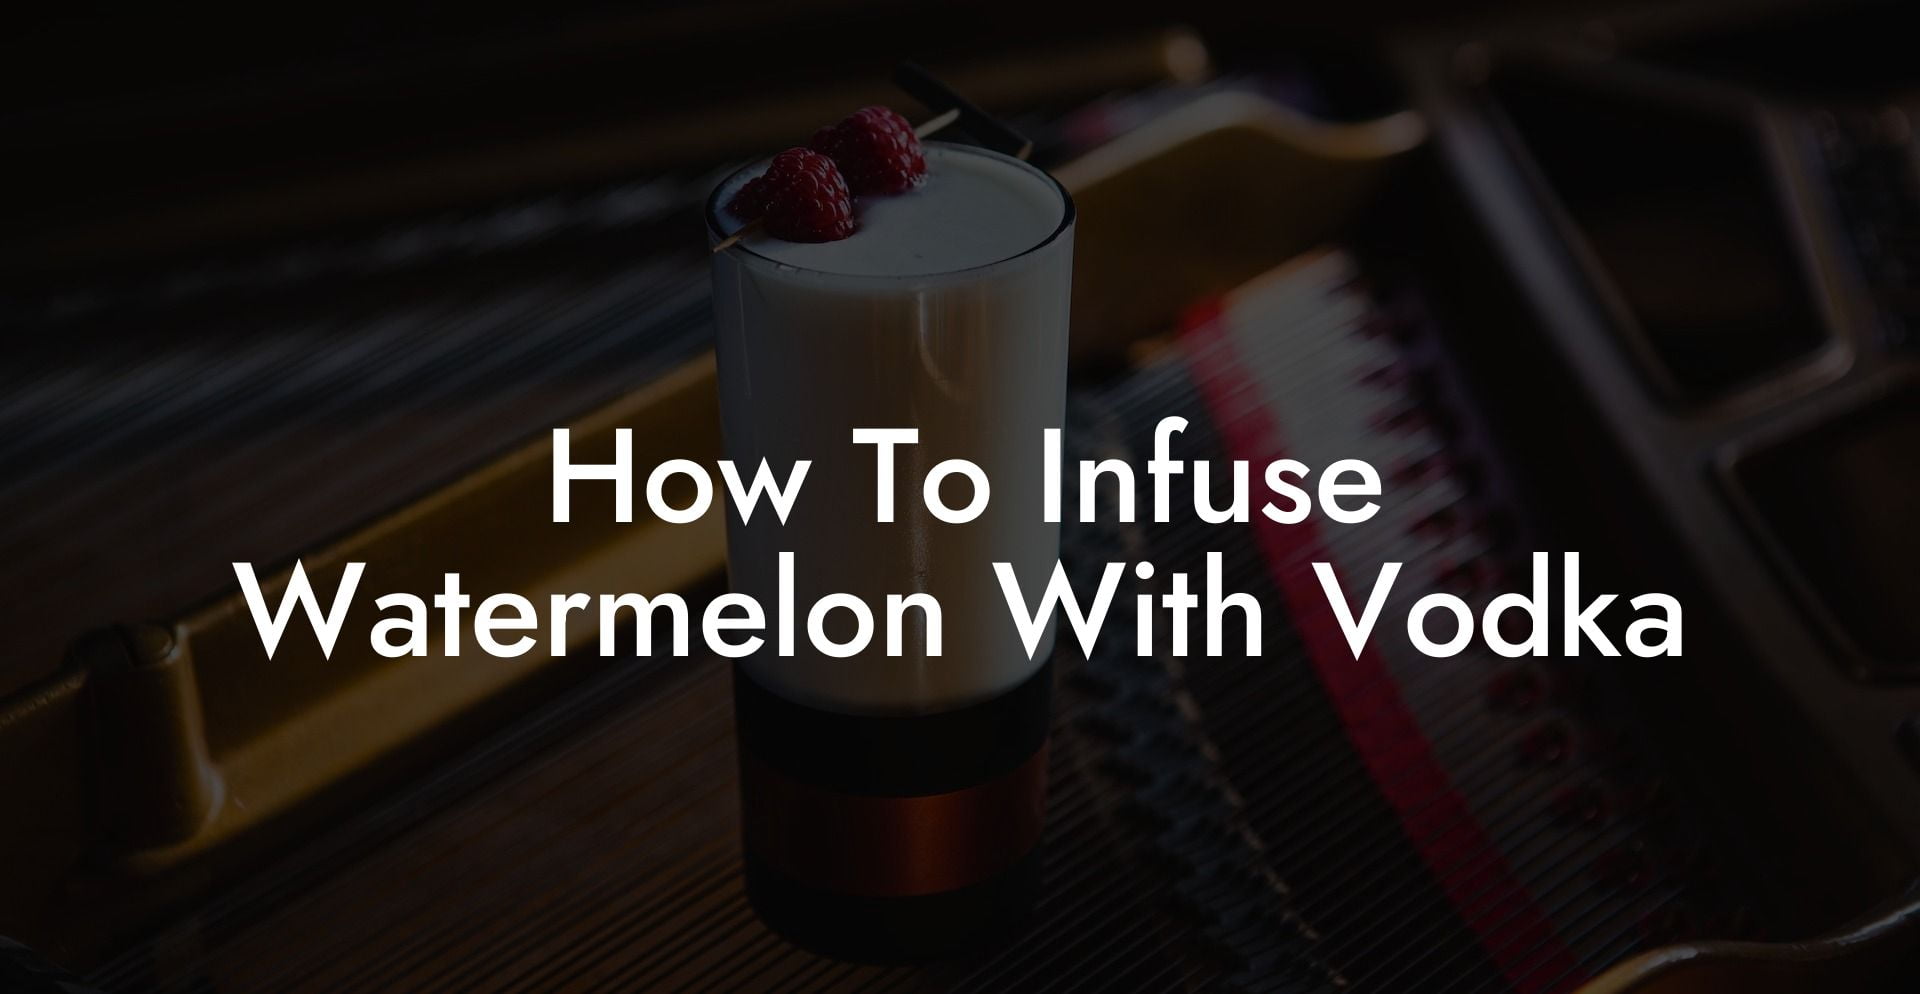 How To Infuse Watermelon With Vodka